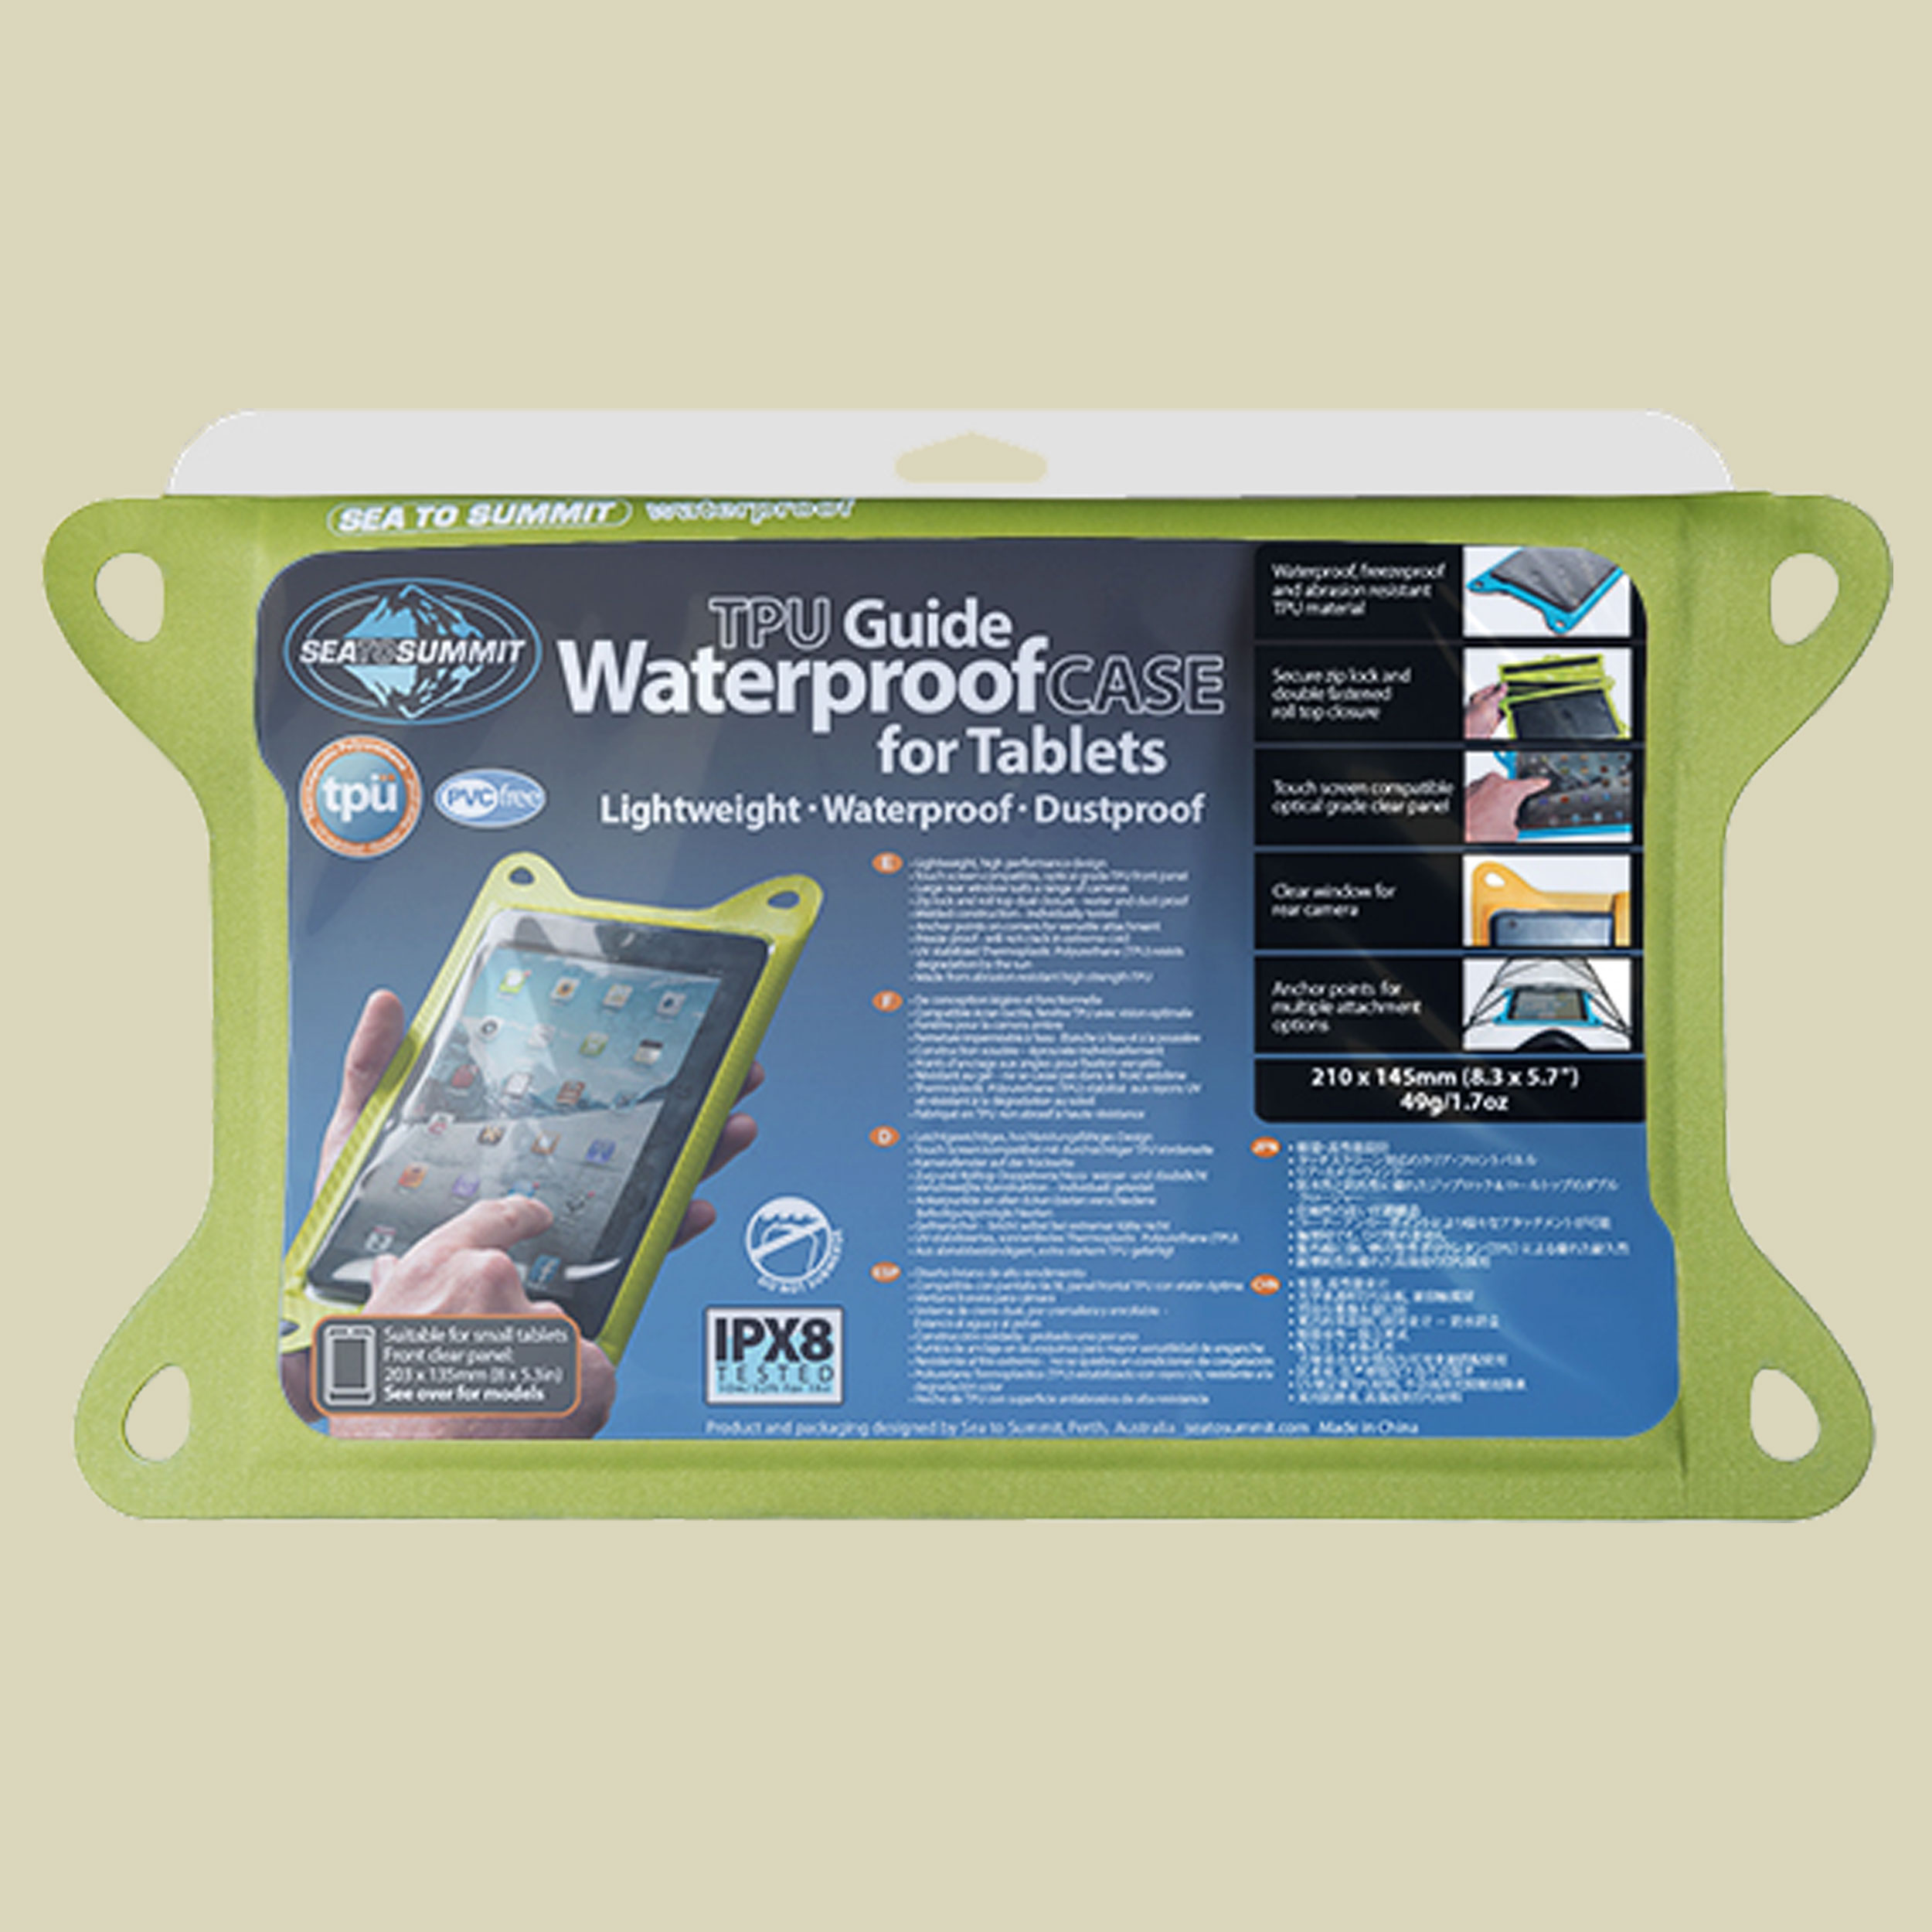 TPU Guide Waterproof Case for Tablets Größe S Farbe Lime